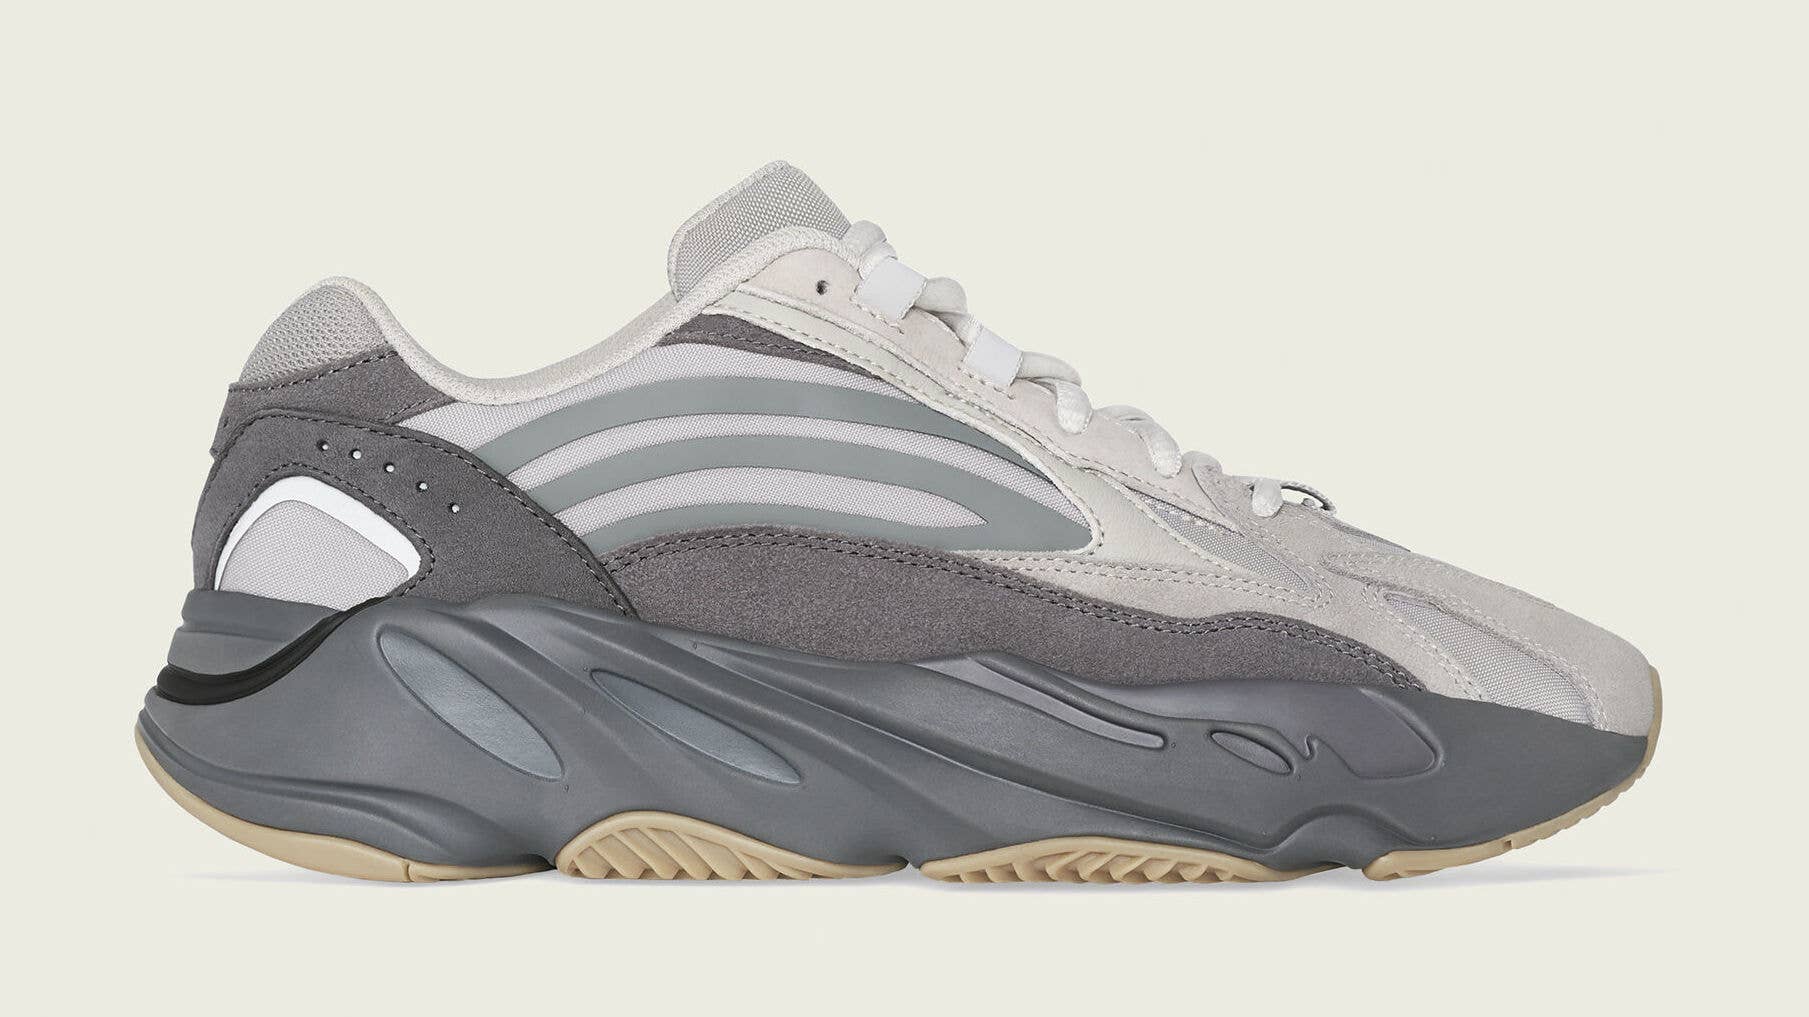 Adidas Yeezy Boost 700 V2 'Tephra' FU7914 Lateral